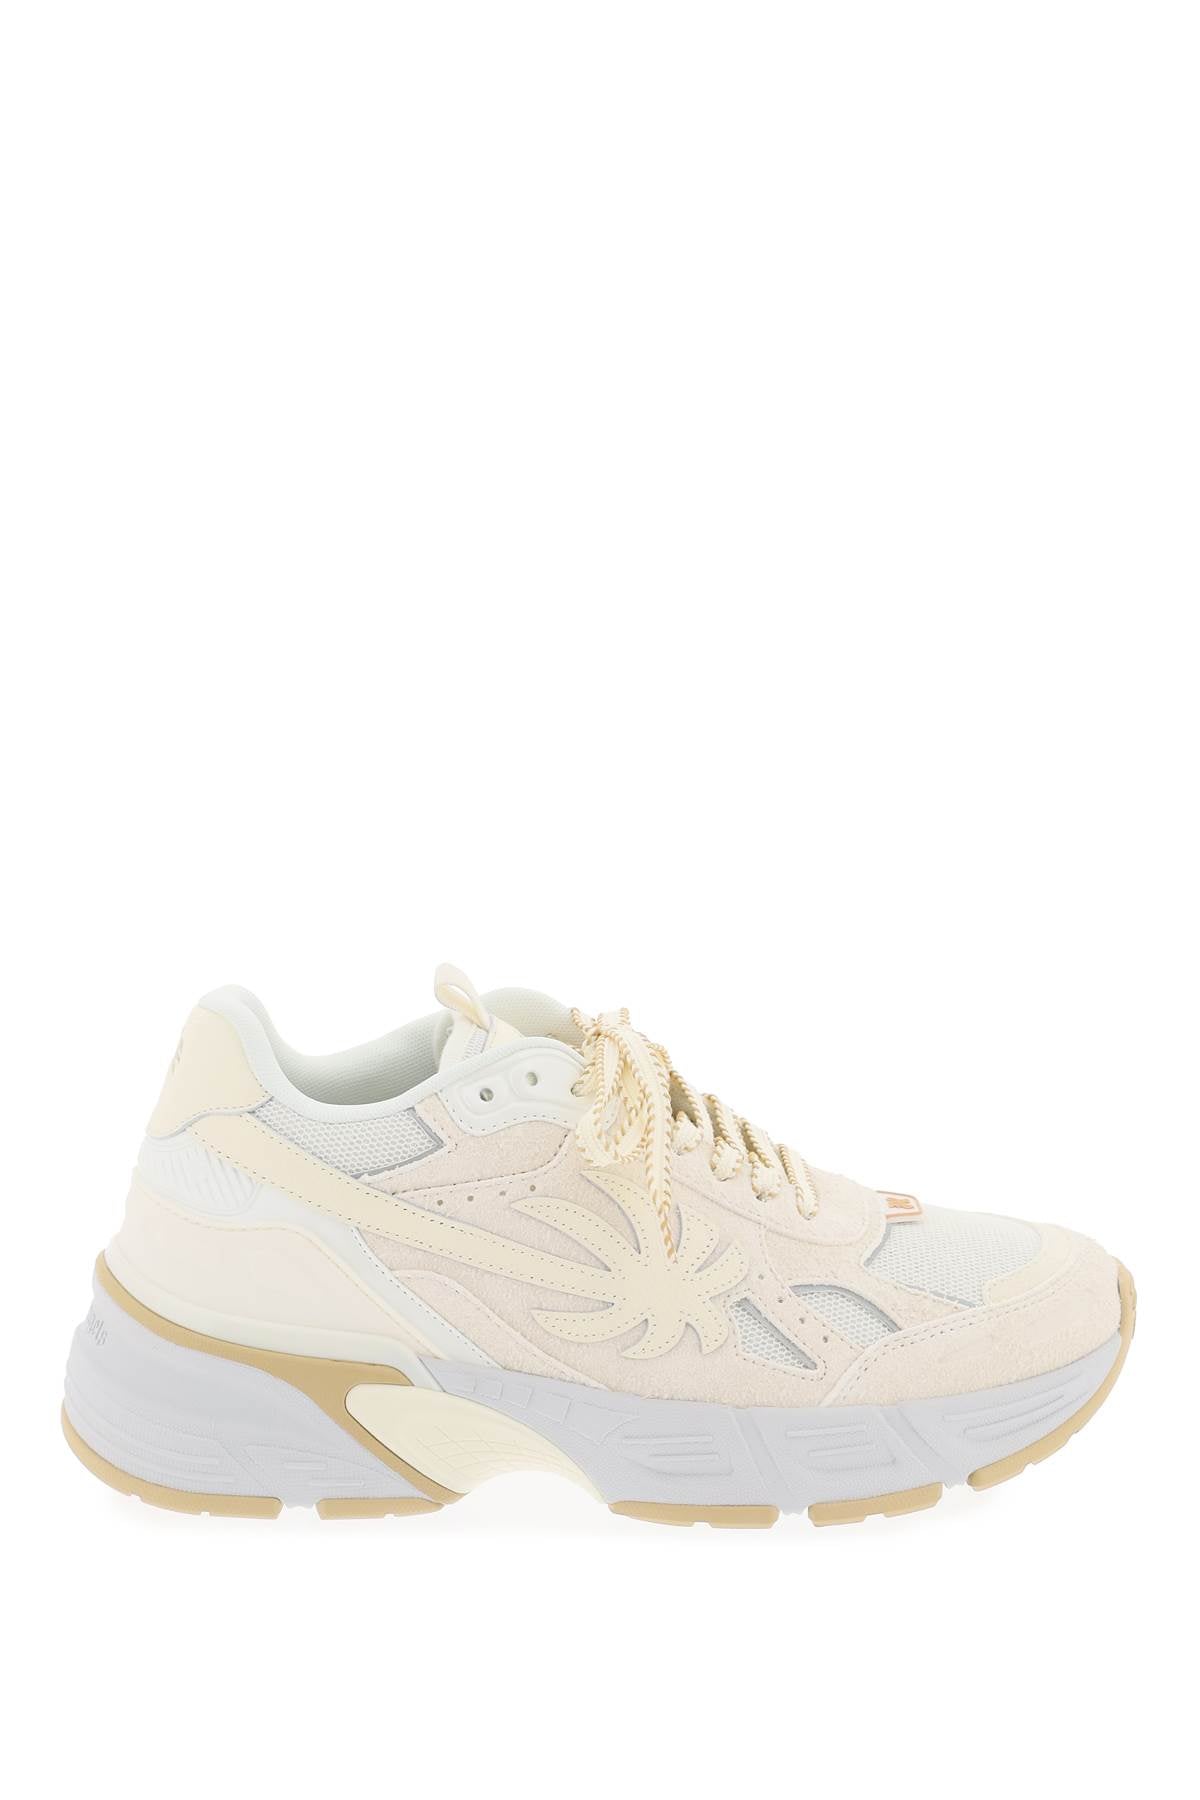 Palm angels palm runner sneakers for-0